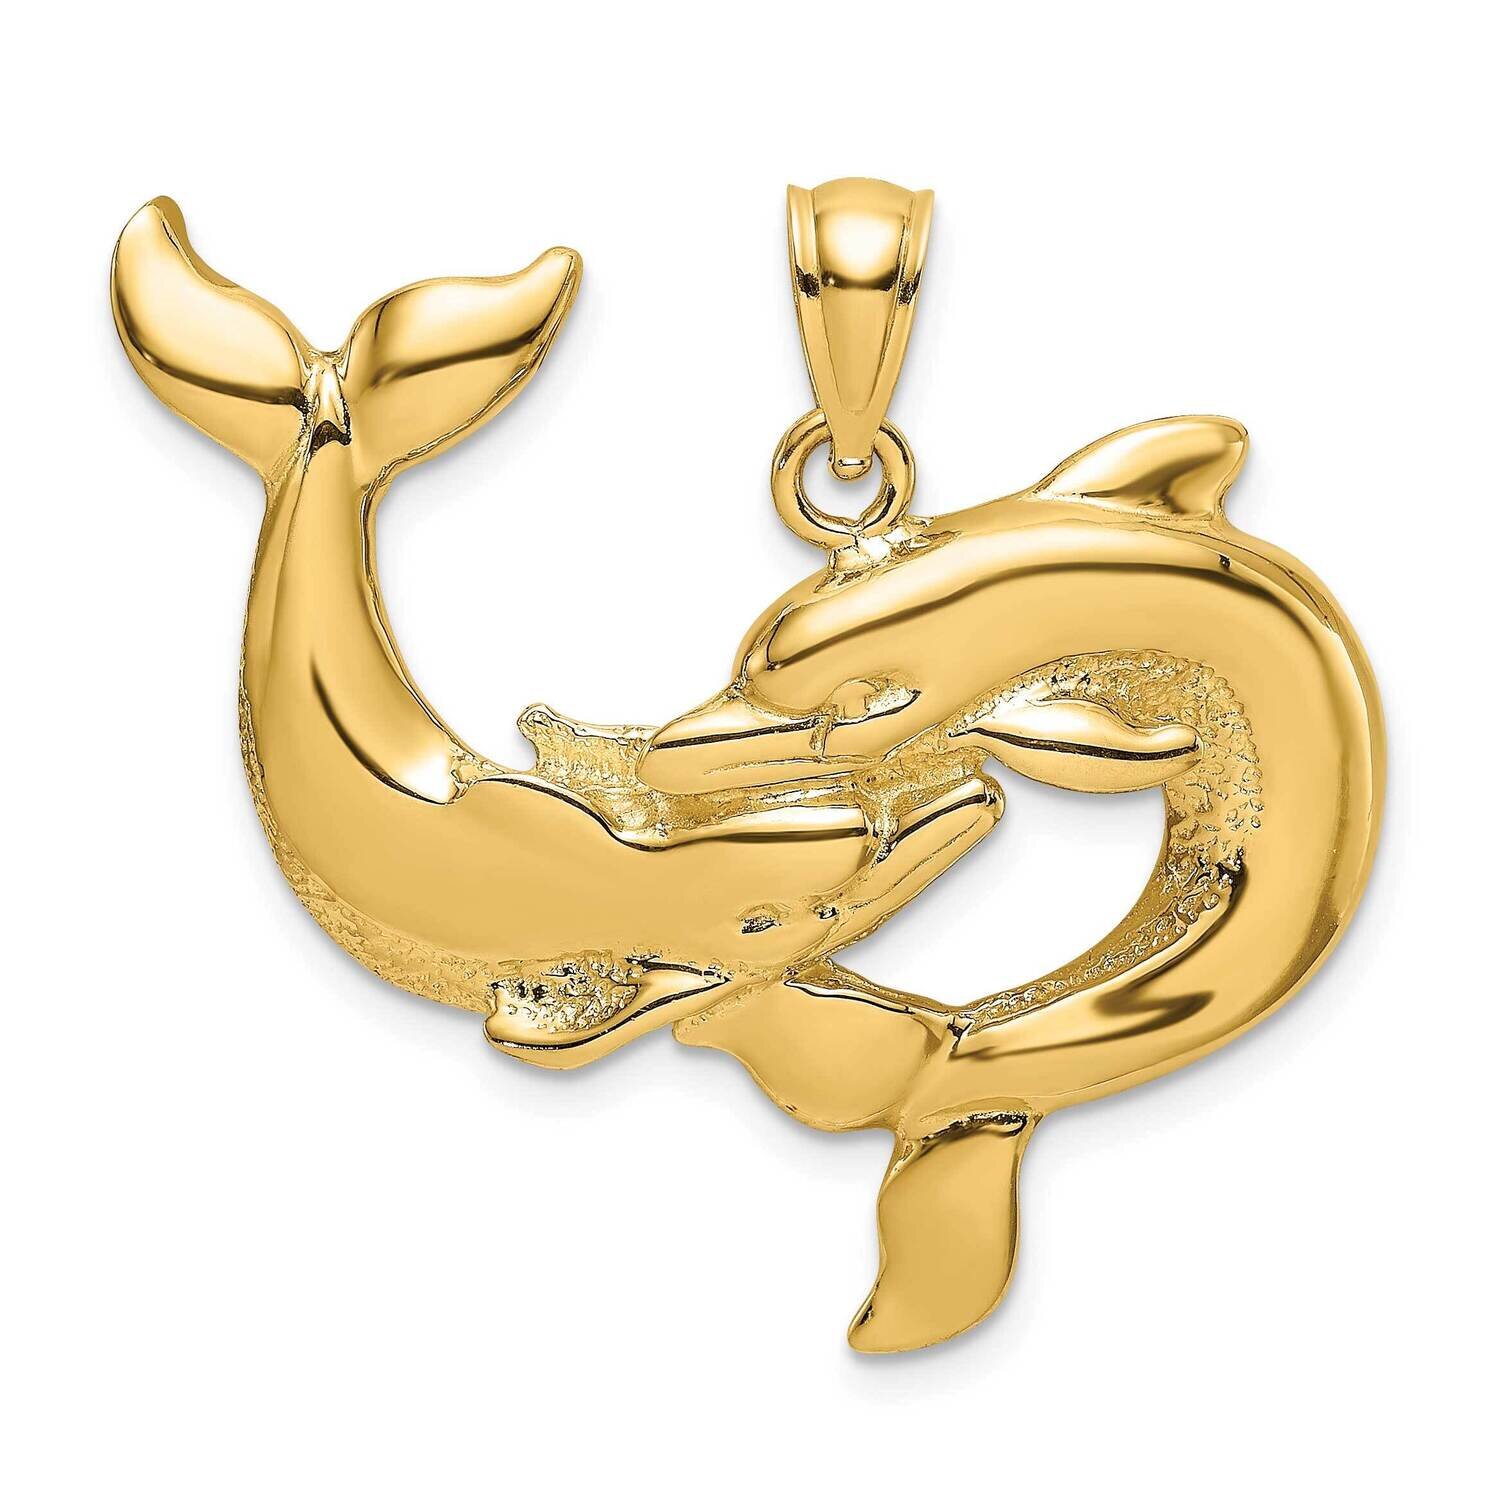 Two Dolphins Together Charm 14k Gold Polished K7723